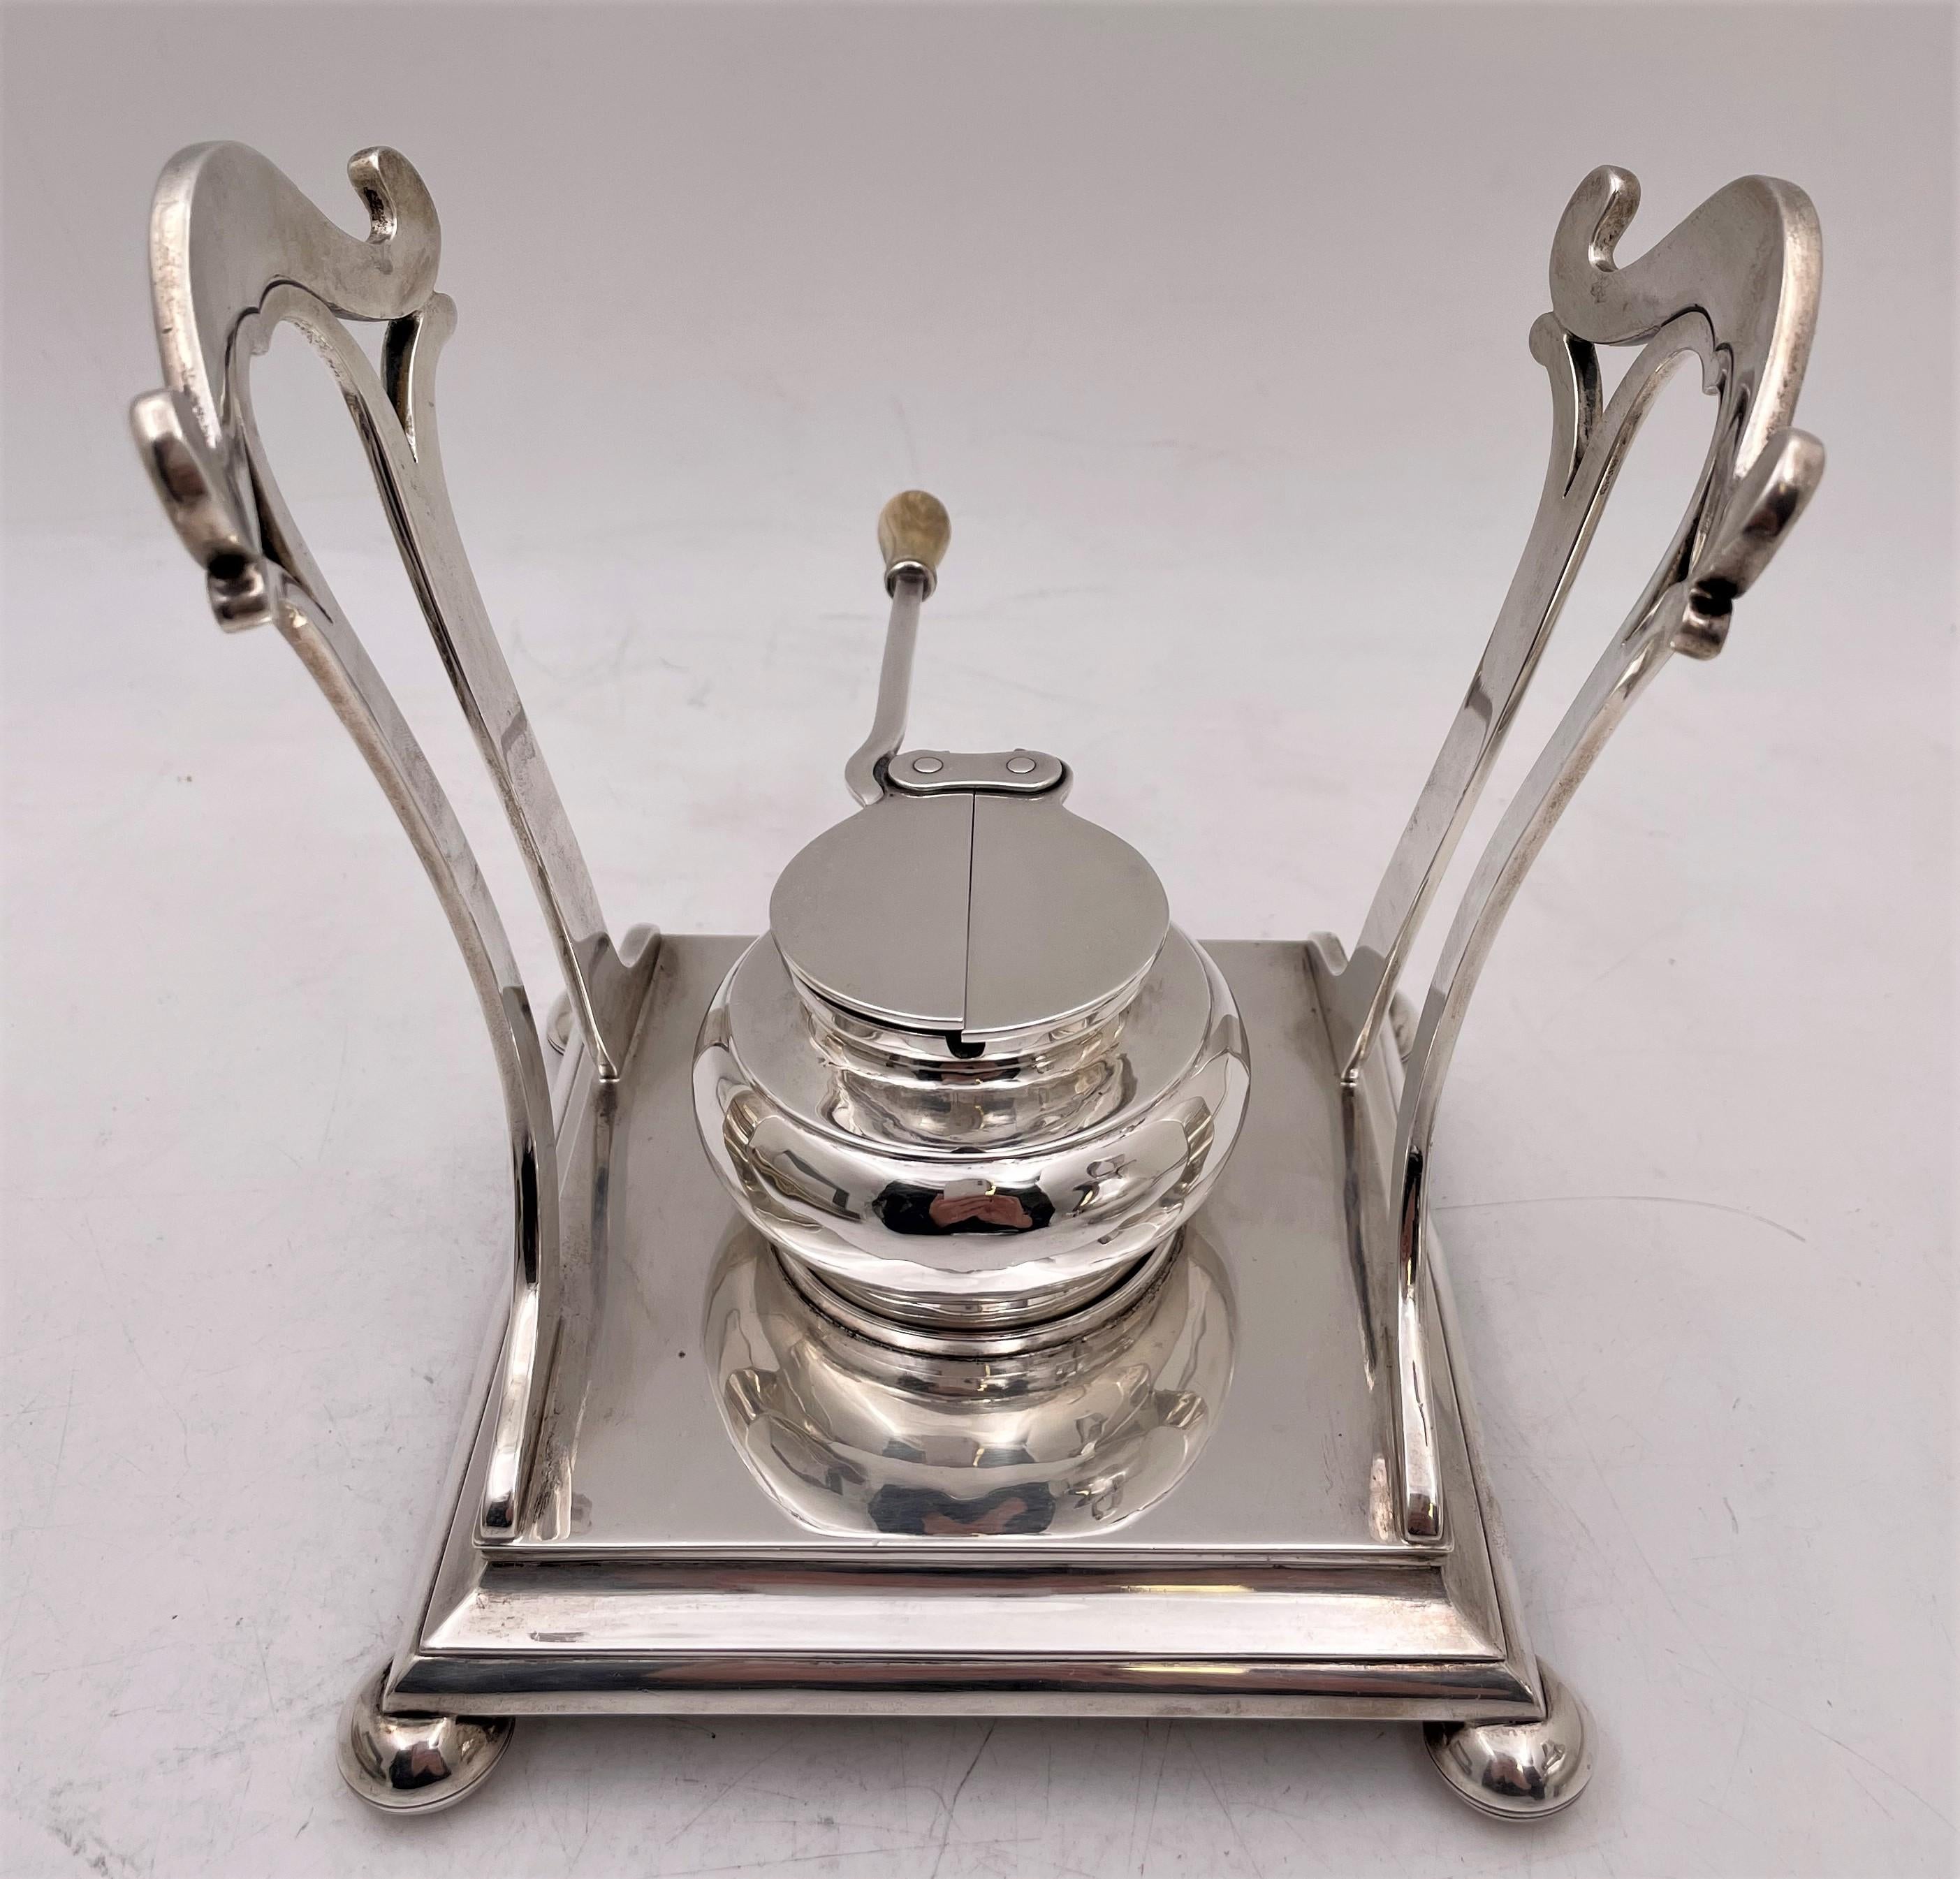 Arthur Stone, hand hammered sterling silver kettle on stand with burner in Arts & Crafts style from the early 20th century. This extremely elegant ensemble exhibits the attention to geometric, curvilinear design typical of the Arts & Crafts